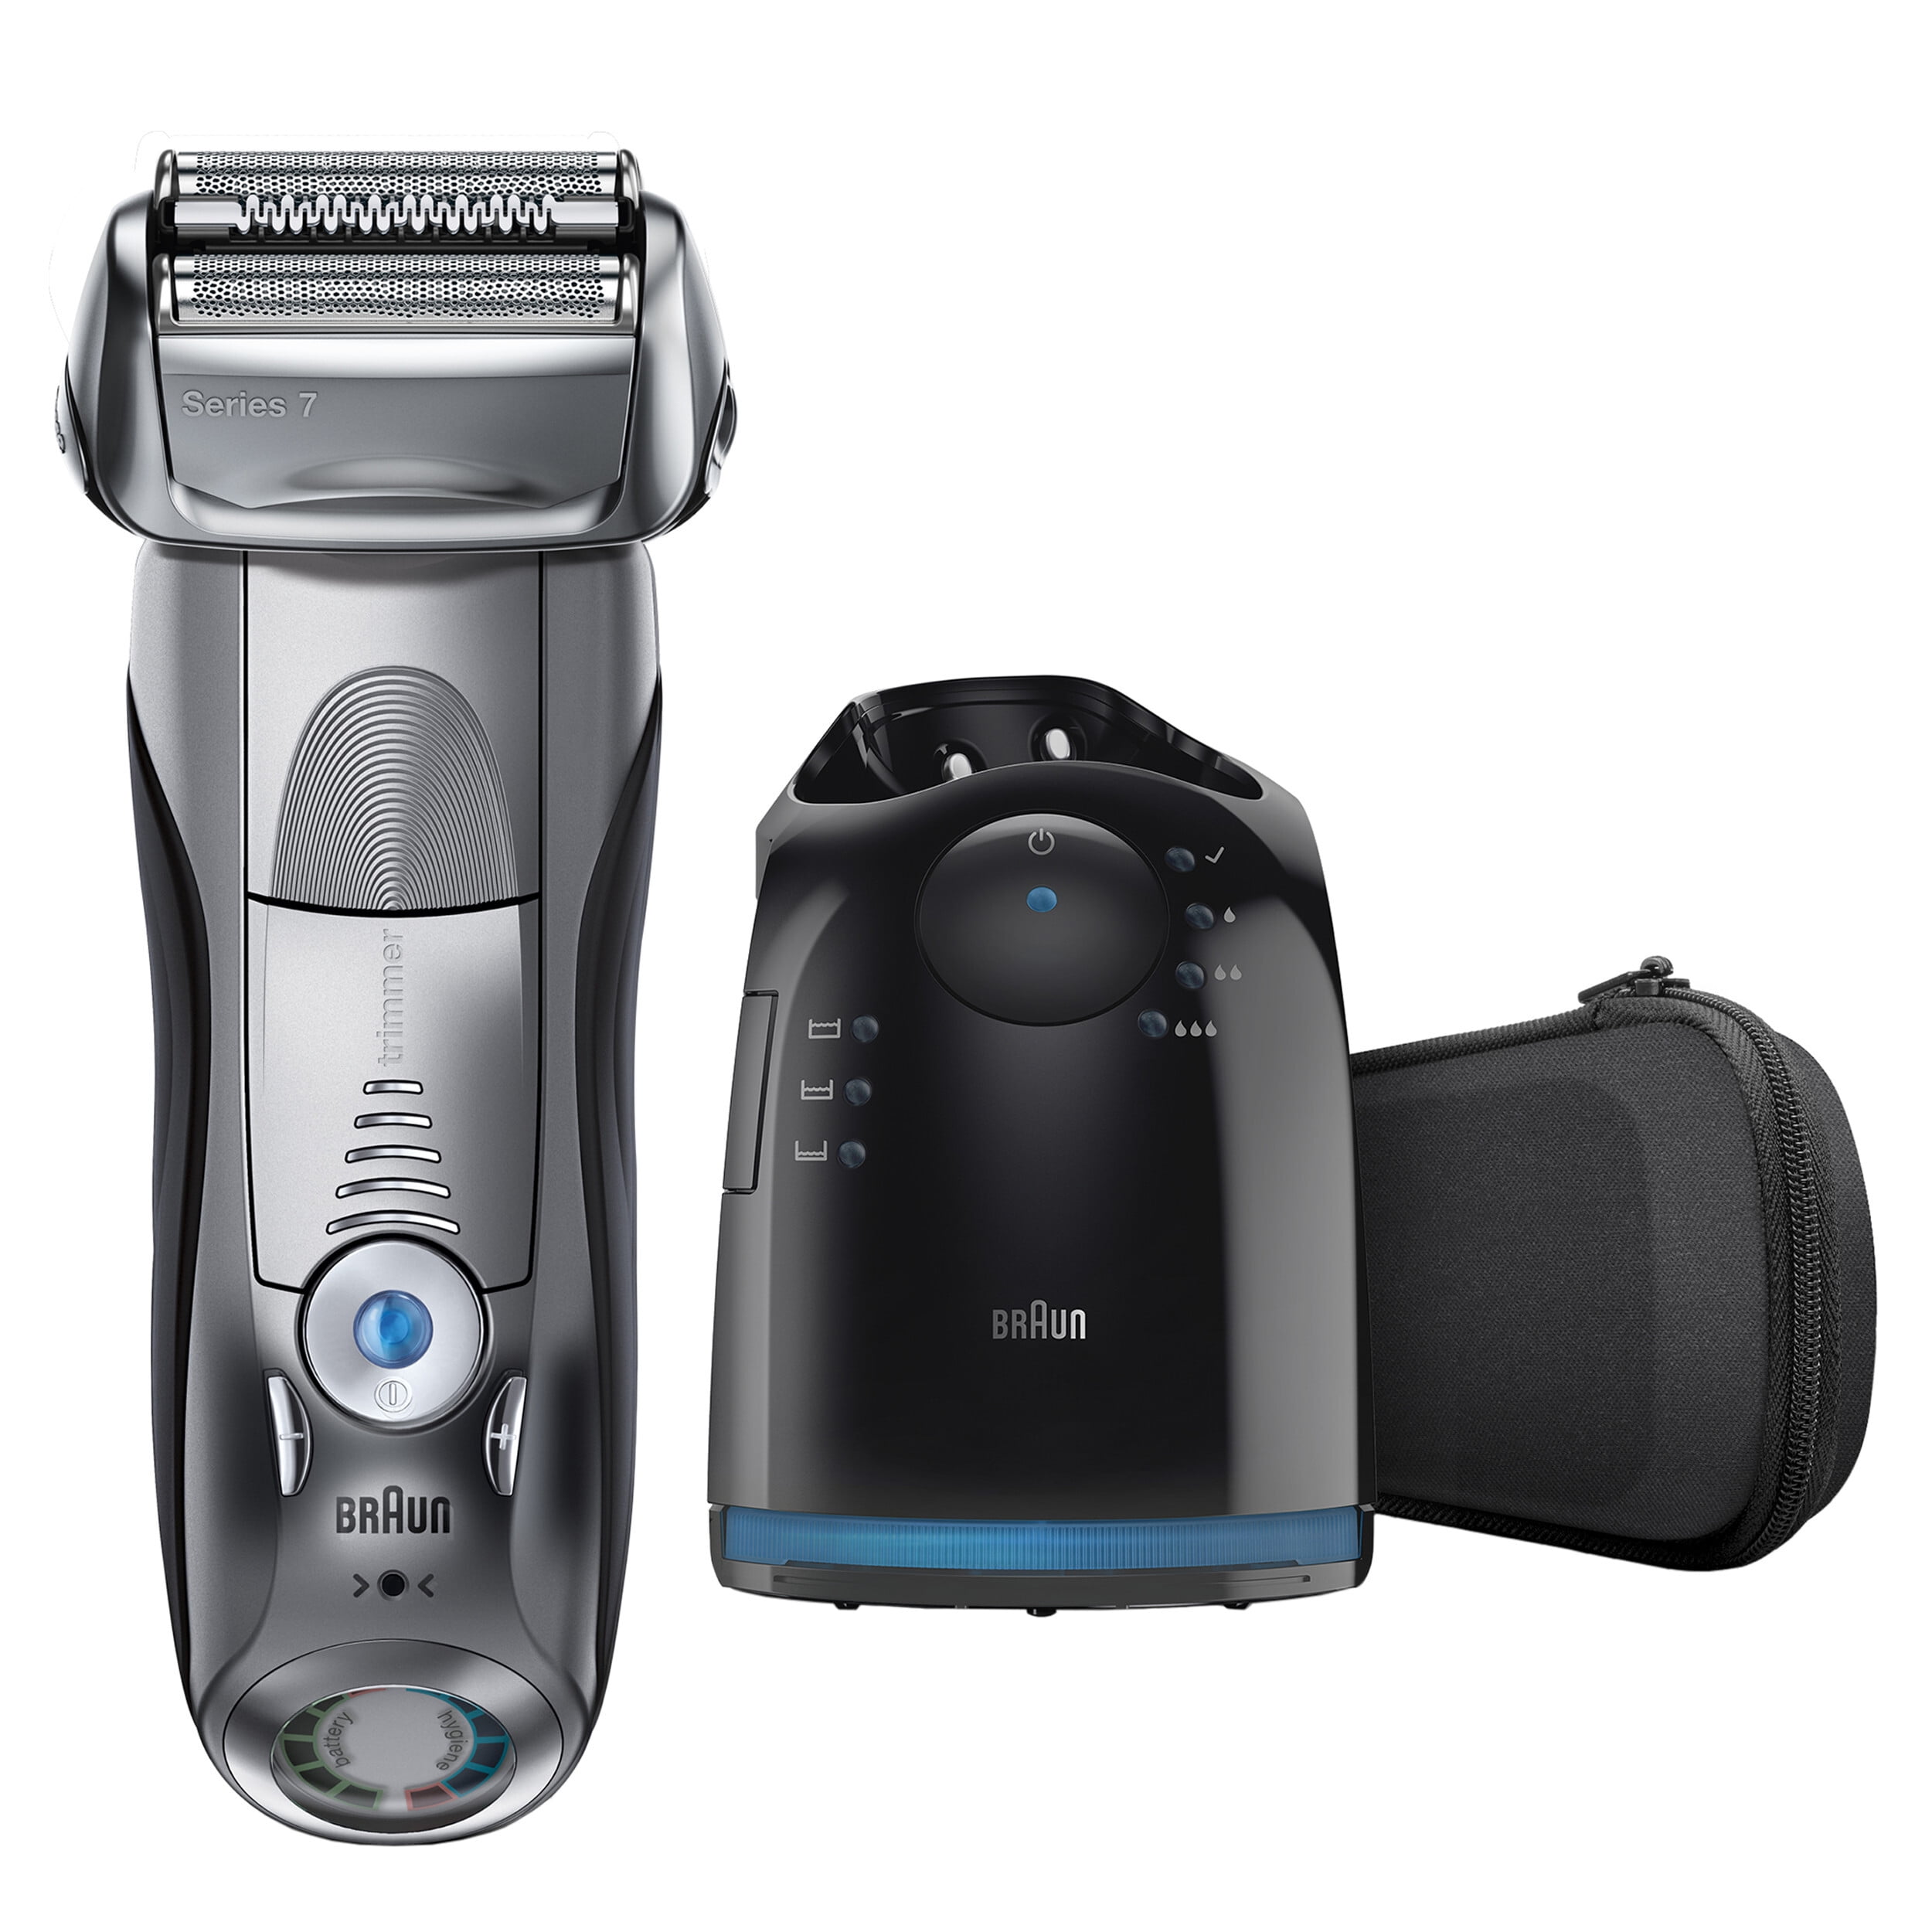 Braun Shaver Cleaner, Beauty & Personal Care, Men's Grooming on